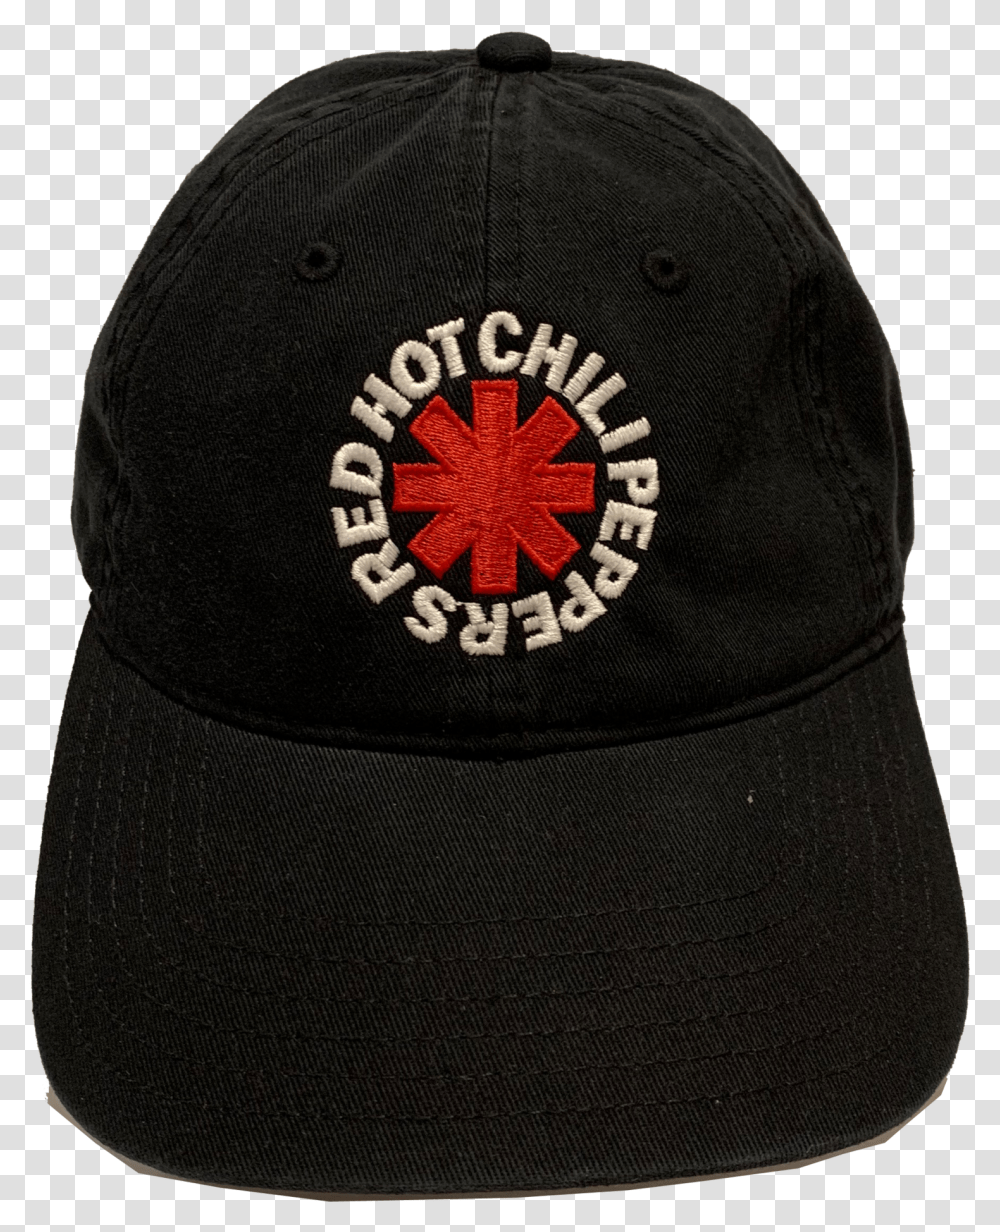 New Rhcp Asterisk Style Black For Baseball, Clothing, Apparel, Baseball Cap, Hat Transparent Png